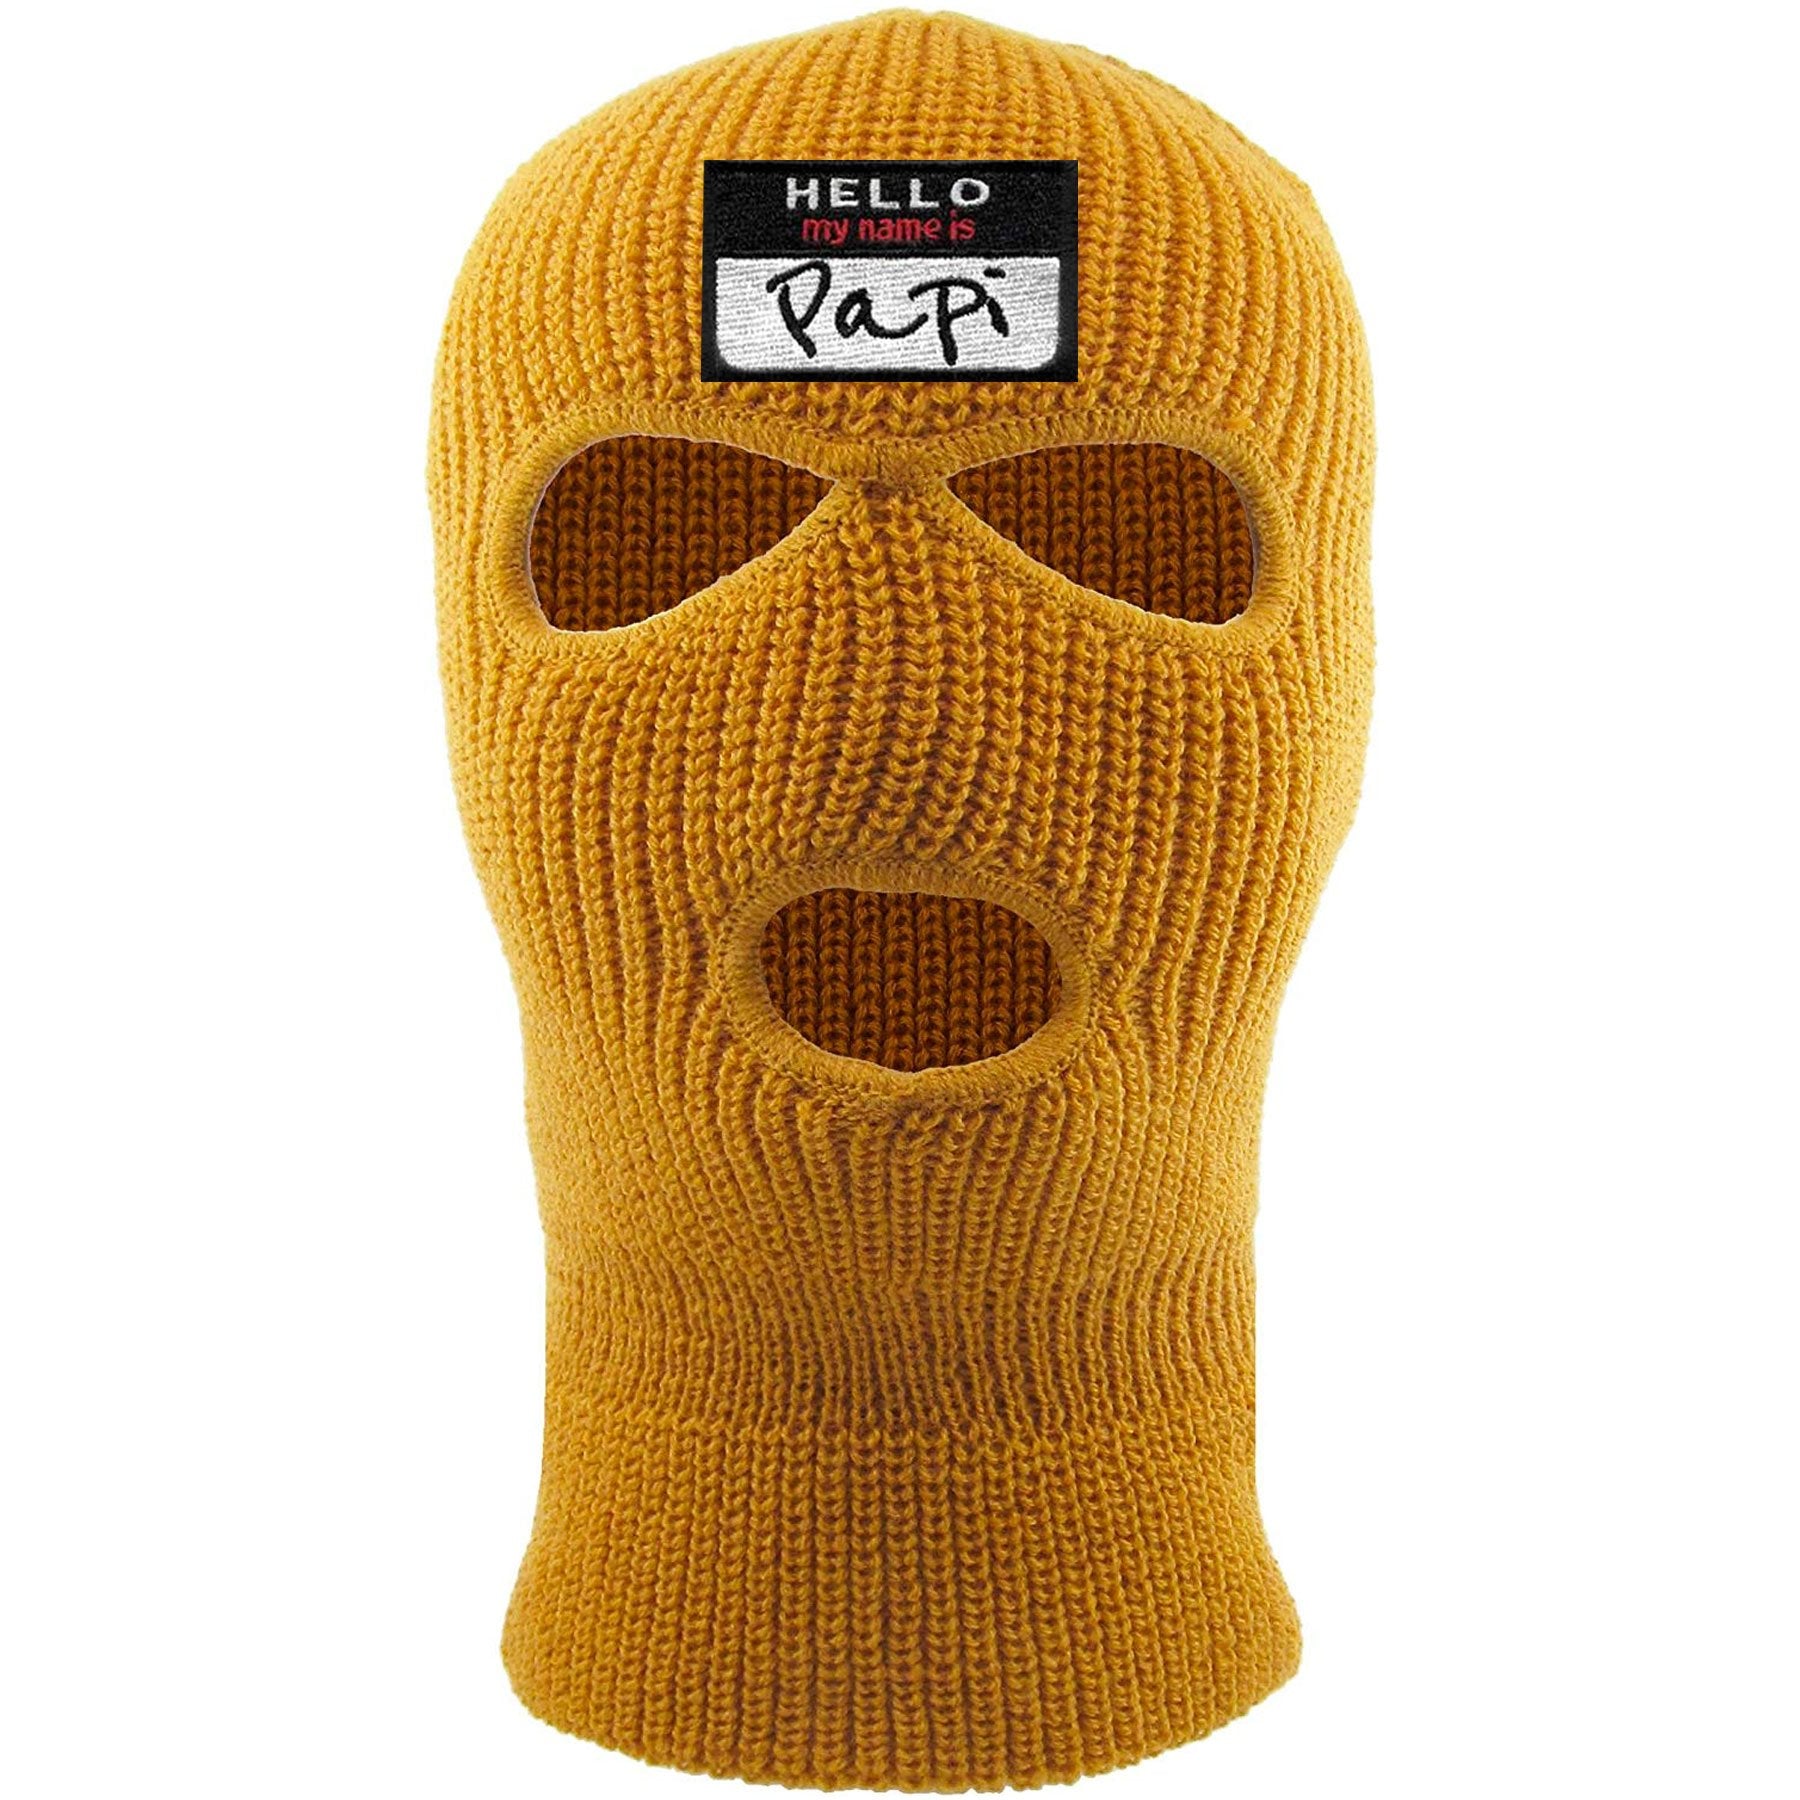 Embroidered on the front of the timberland ski mask is the hello my name is papi logo embroidered in black, white, and red